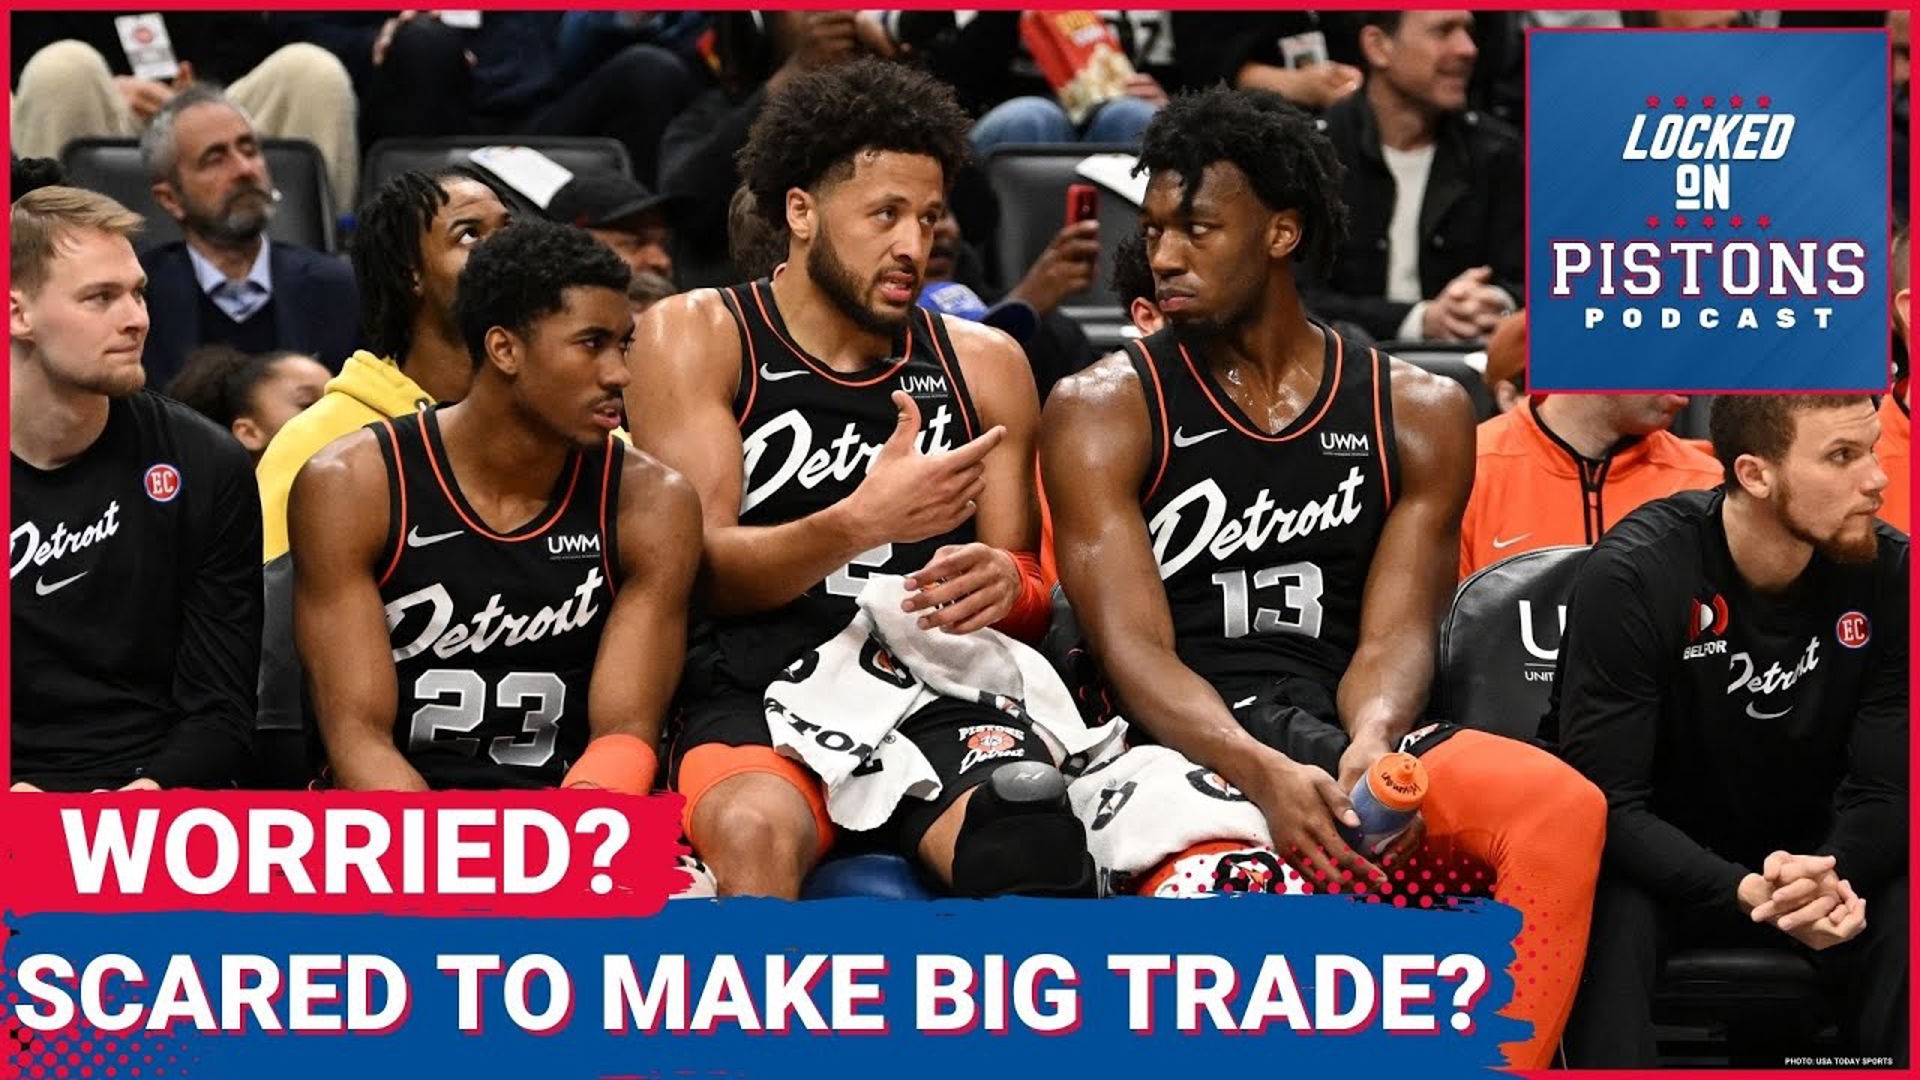 The Detroit Pistons will be making many changes this offseason, but some fans seem concerned about potentially trading away young talent in fear of capping this team